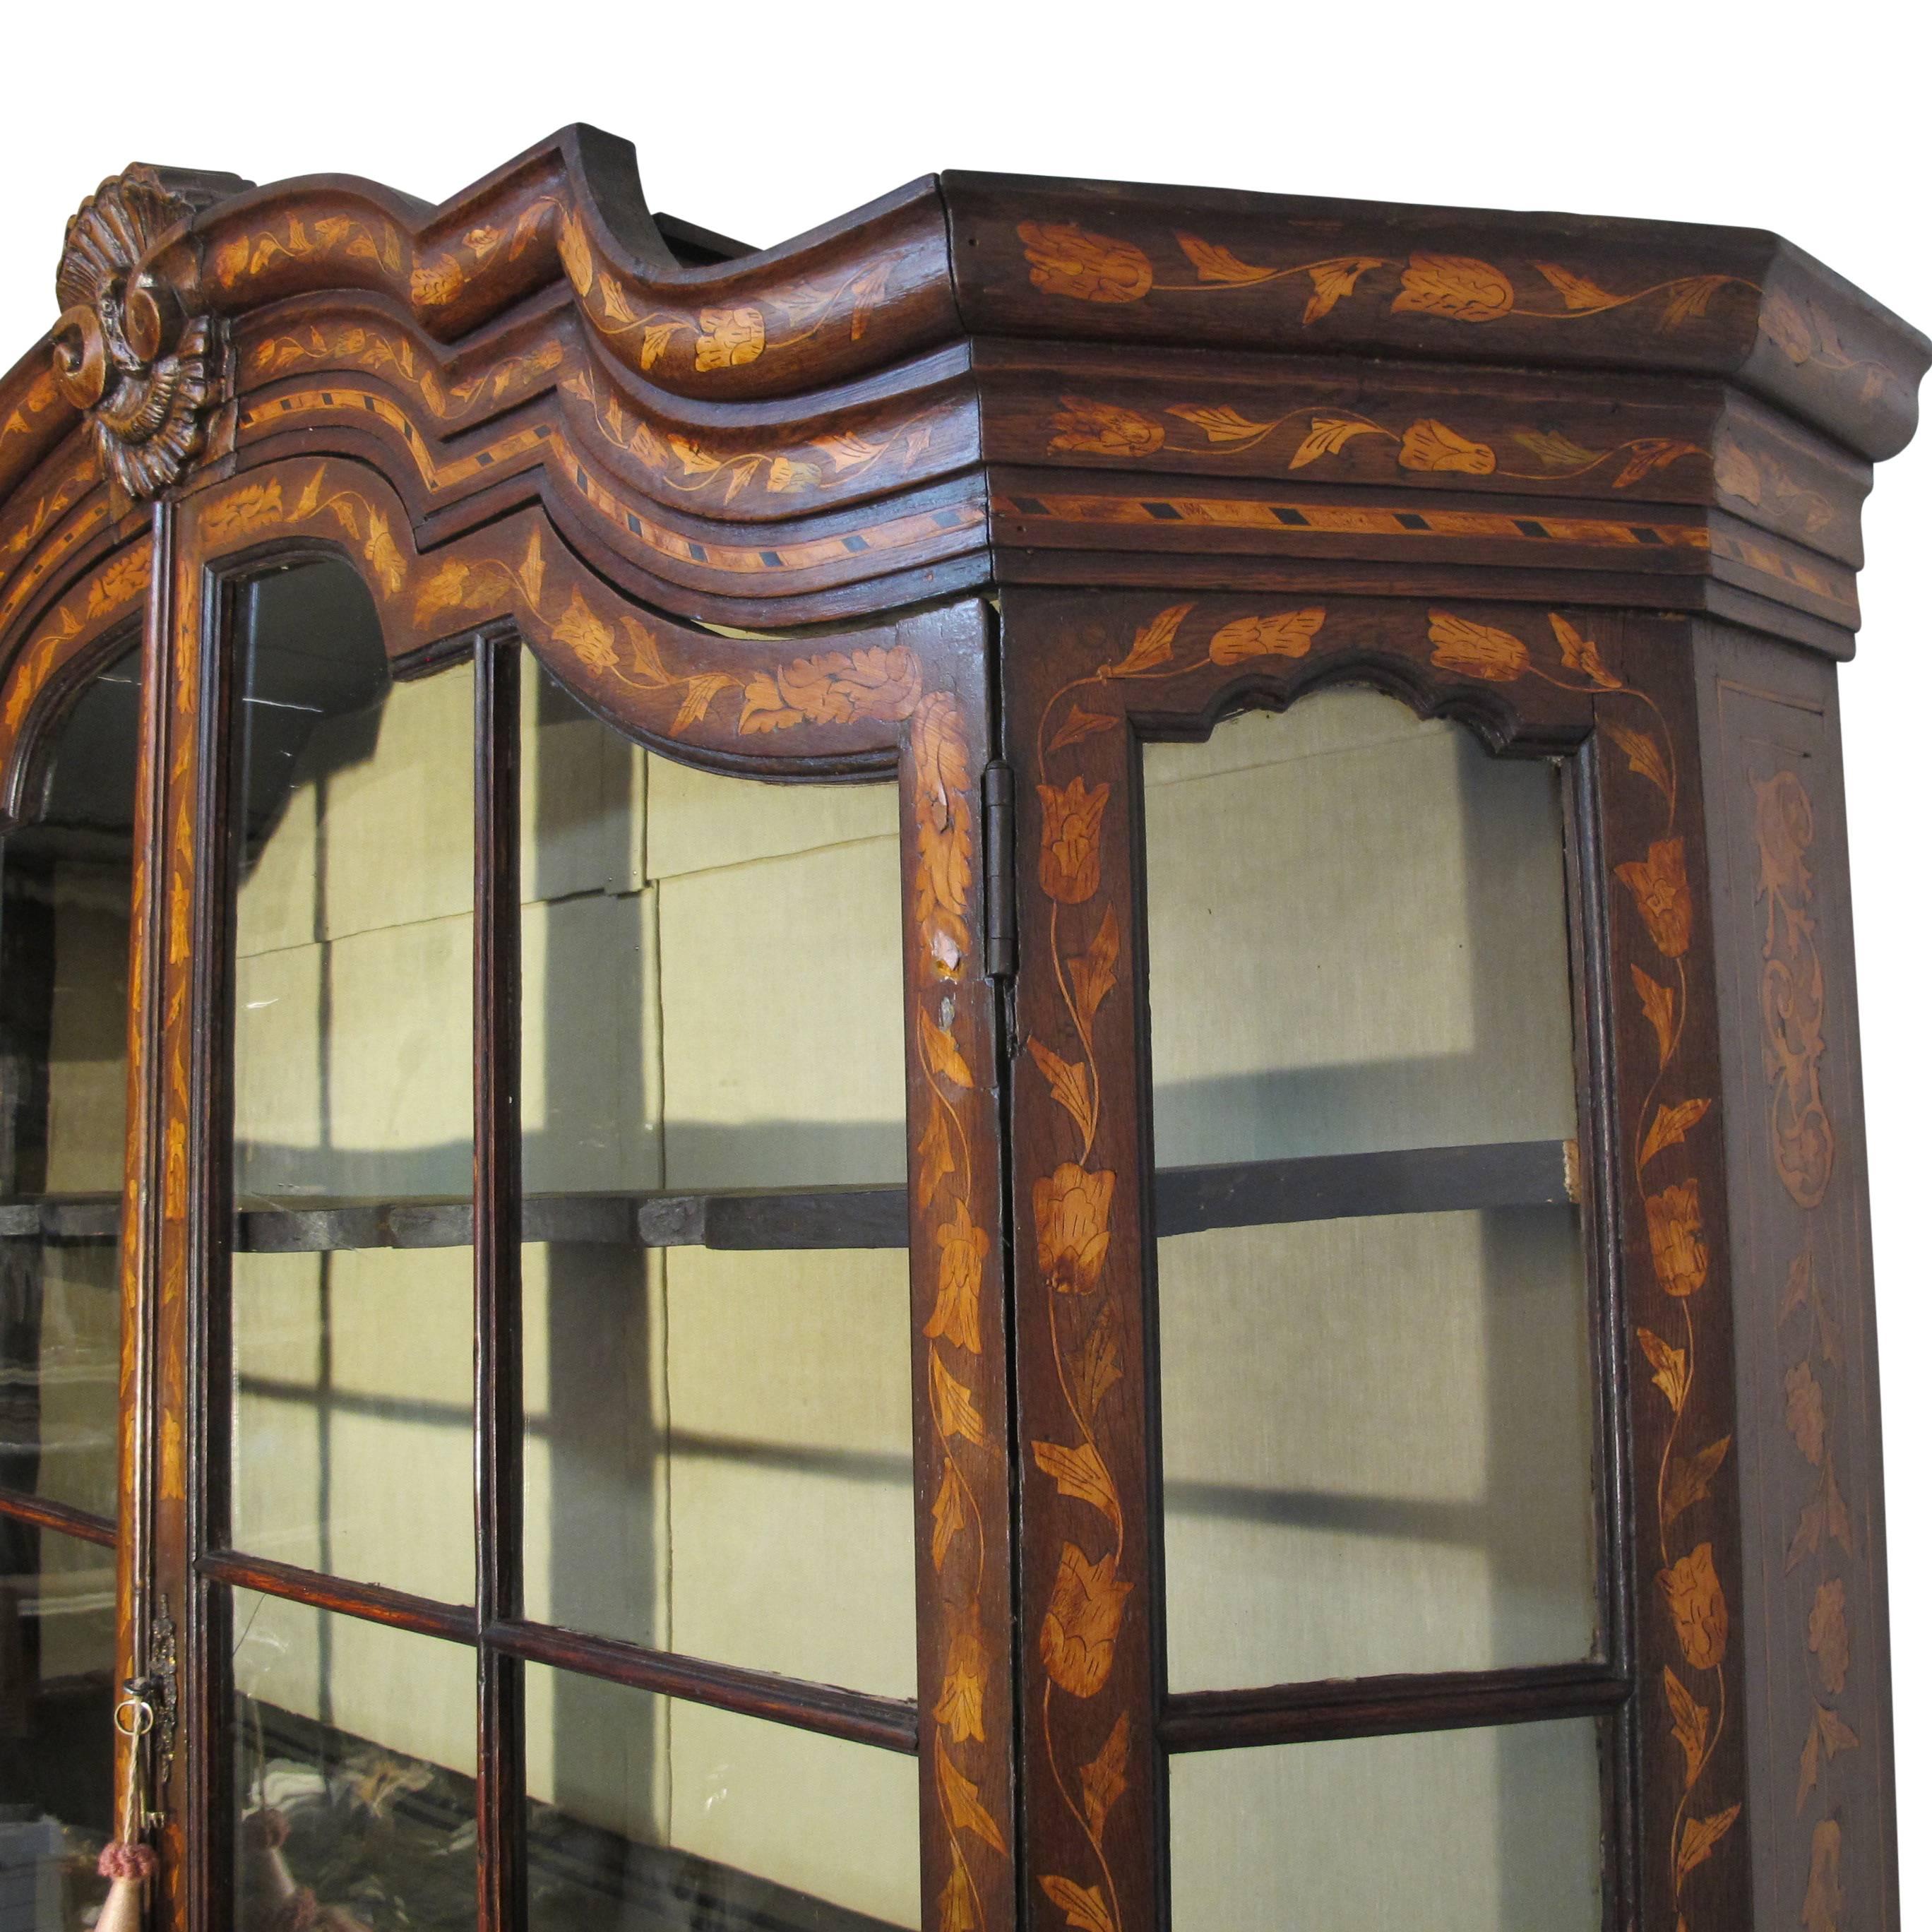 A beautiful example of an early 18th century Dutch cabinet. Walnut with fruitwood inlay marquetry design of leaves, flowers and urns. Having its original shelves, original hardware, and most of the original glass. Recently re-lined interior in silk